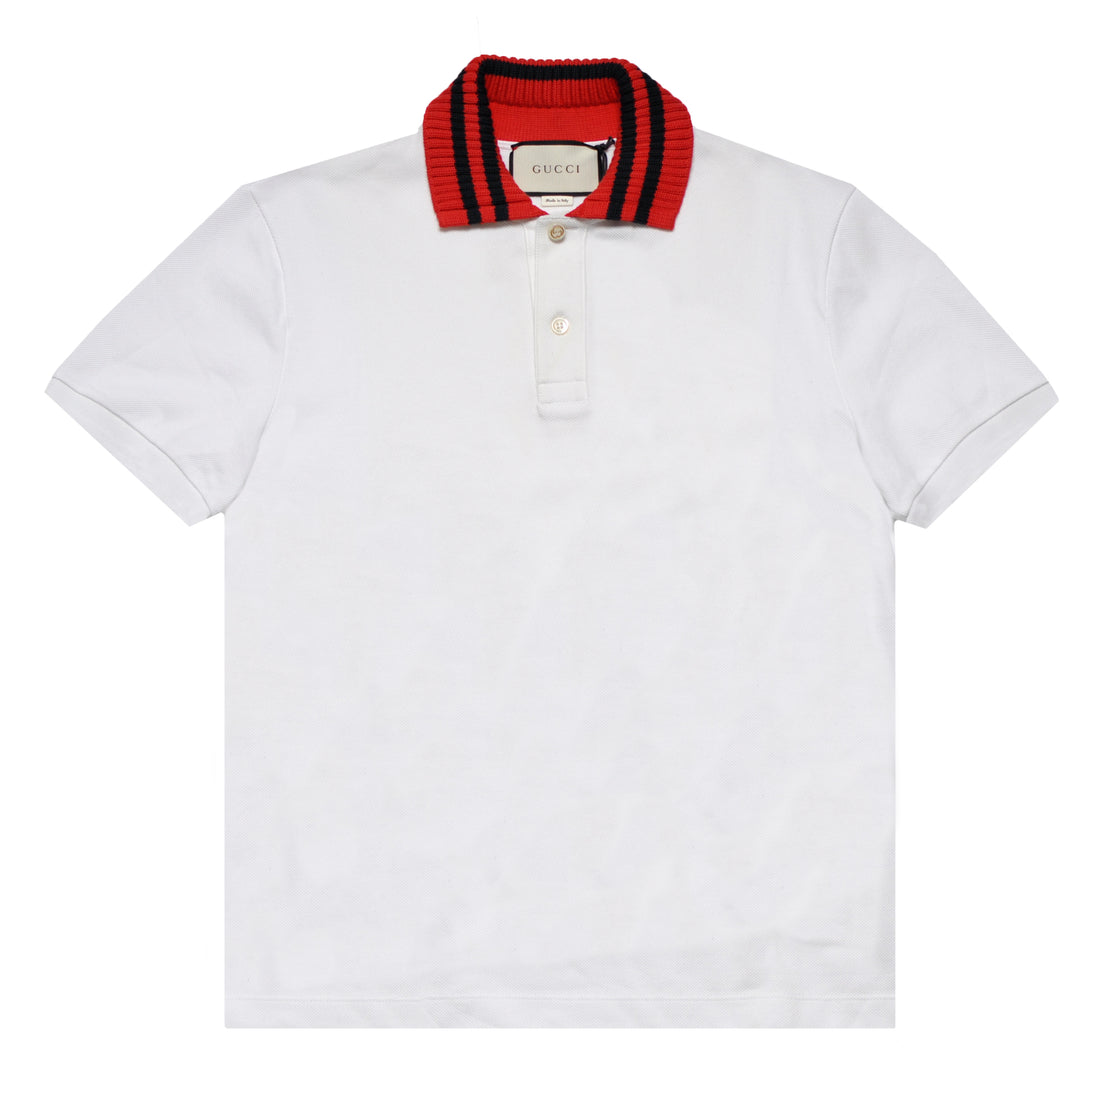 Gucci Knitted Collar Polo Shirt